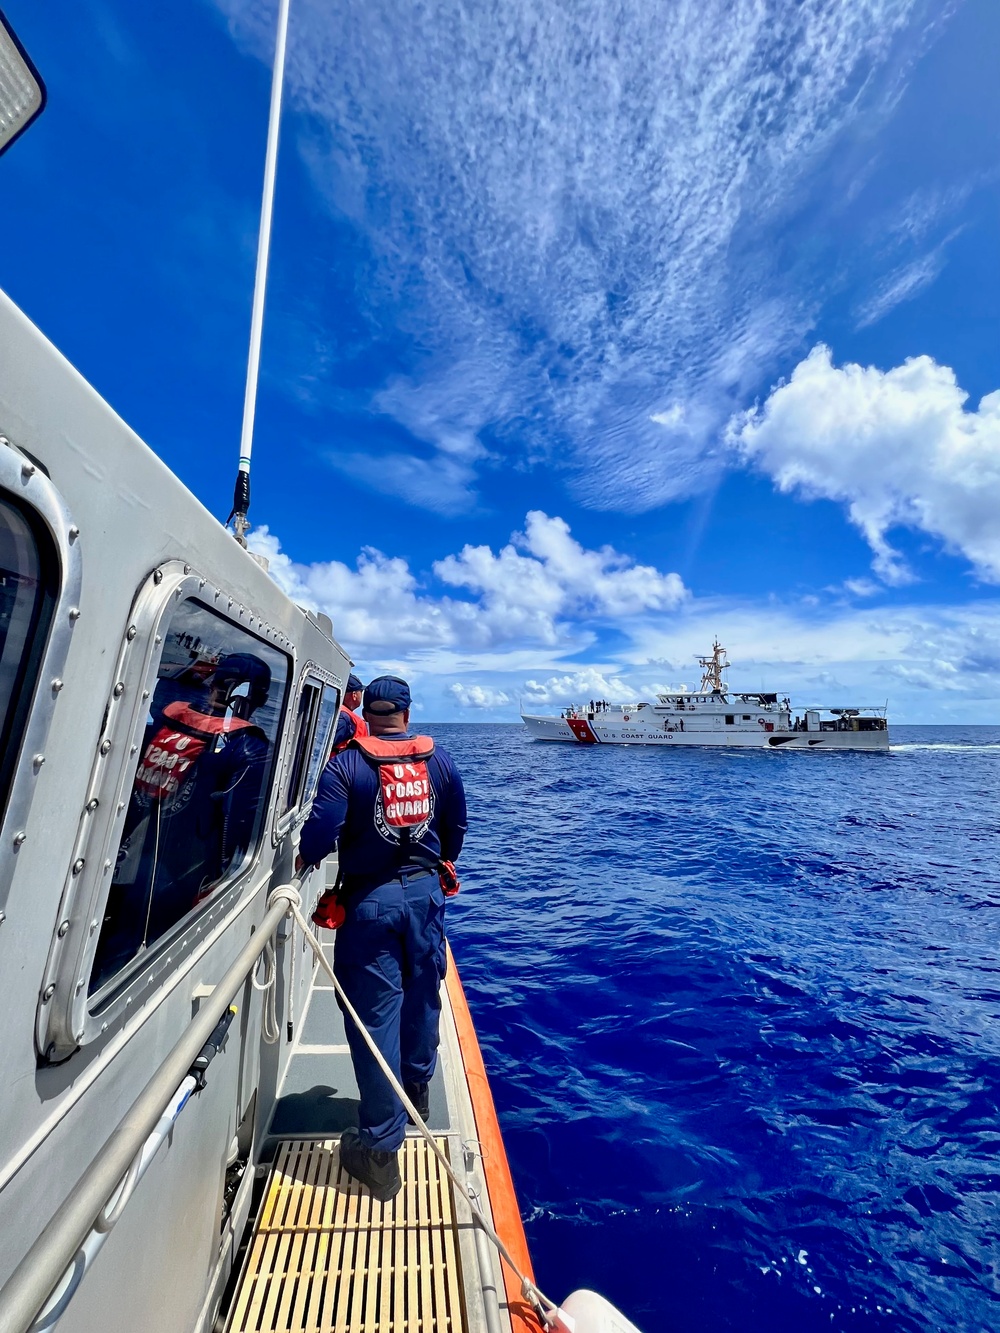 Guam joint interagency annual search and rescue exercise